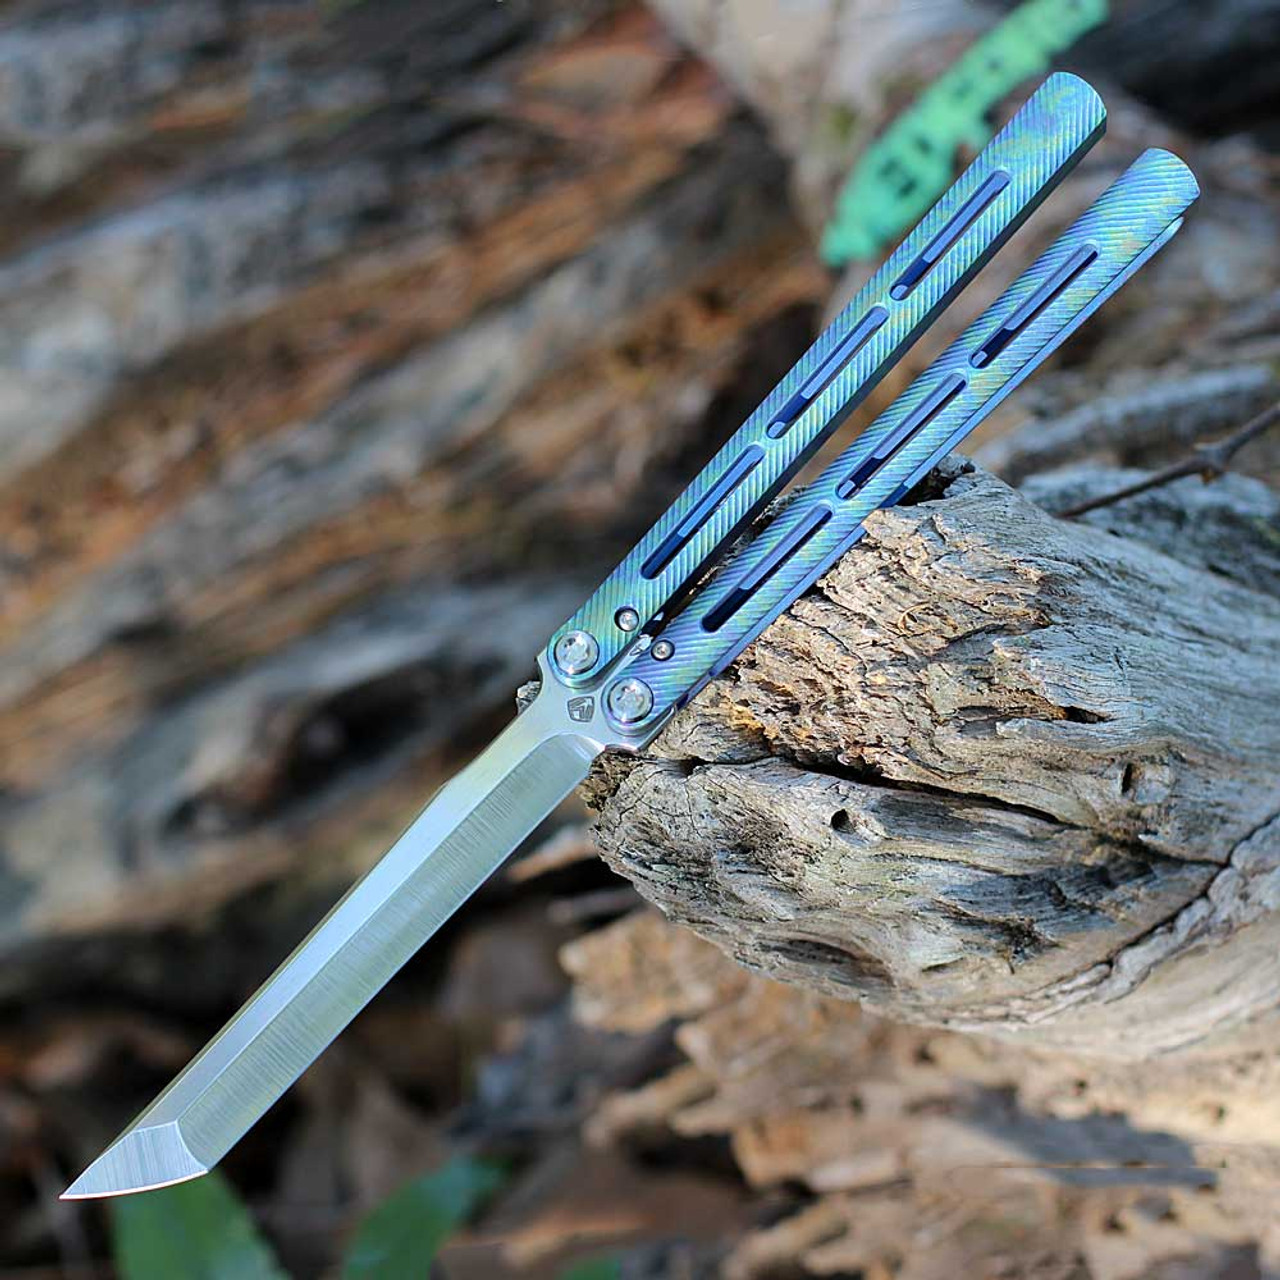 Medford Knife & Tool Viceroy Balisong Butterfly Knife - 4.85" Tumbled CPM-S45VN Tanto Plain Blade, Multi-colored Sponge Anodized Titanium Handle